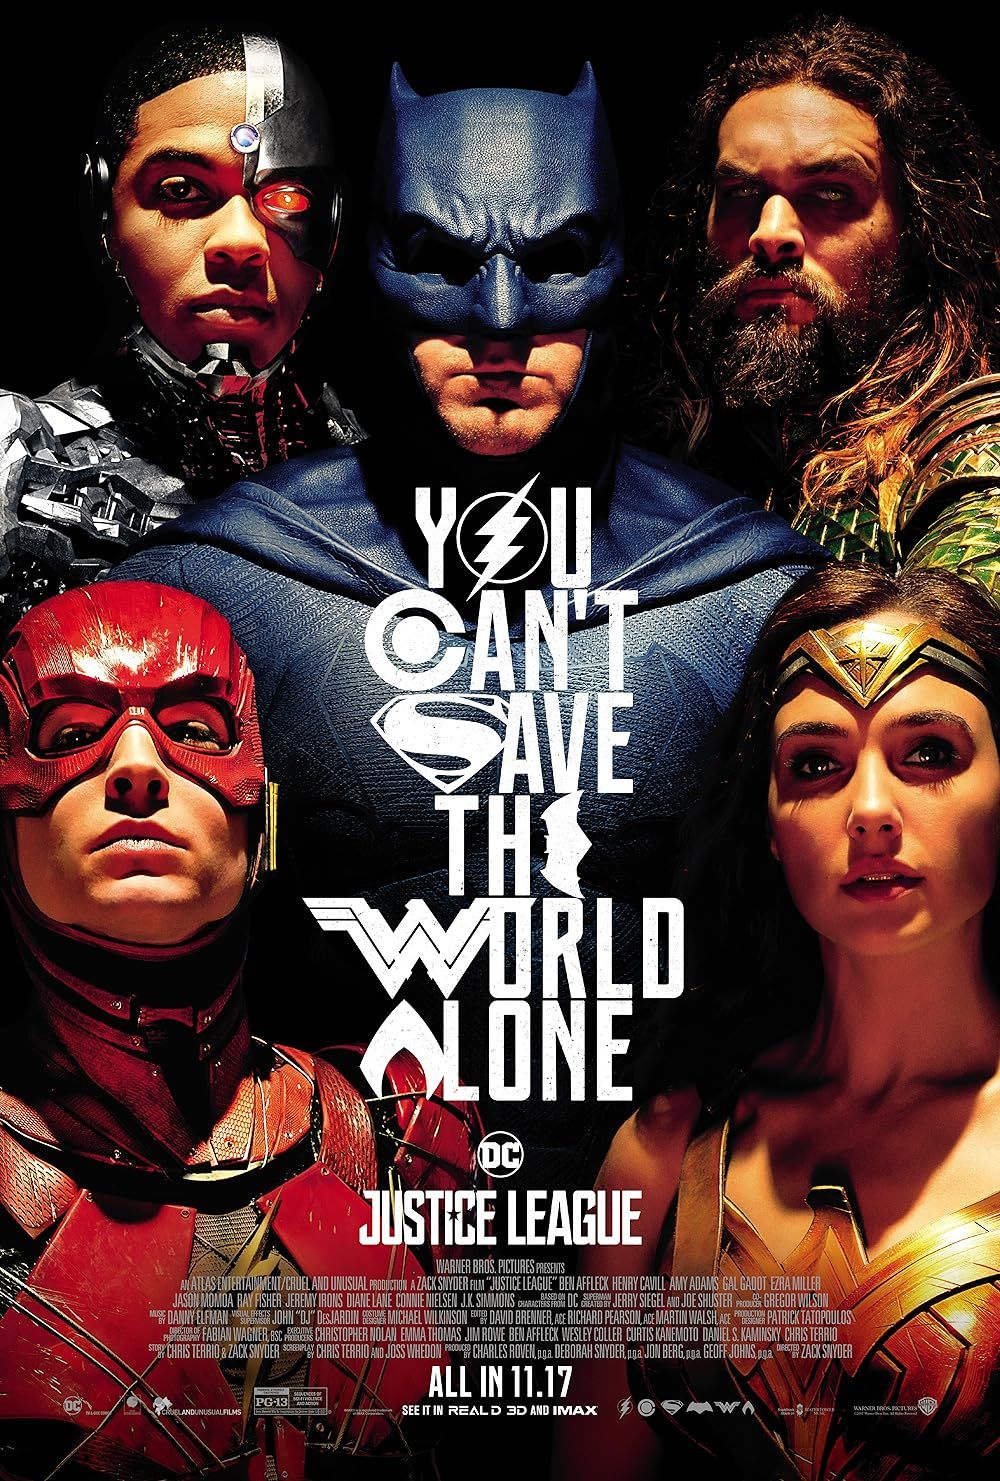 The Cast on the Justice League Poster